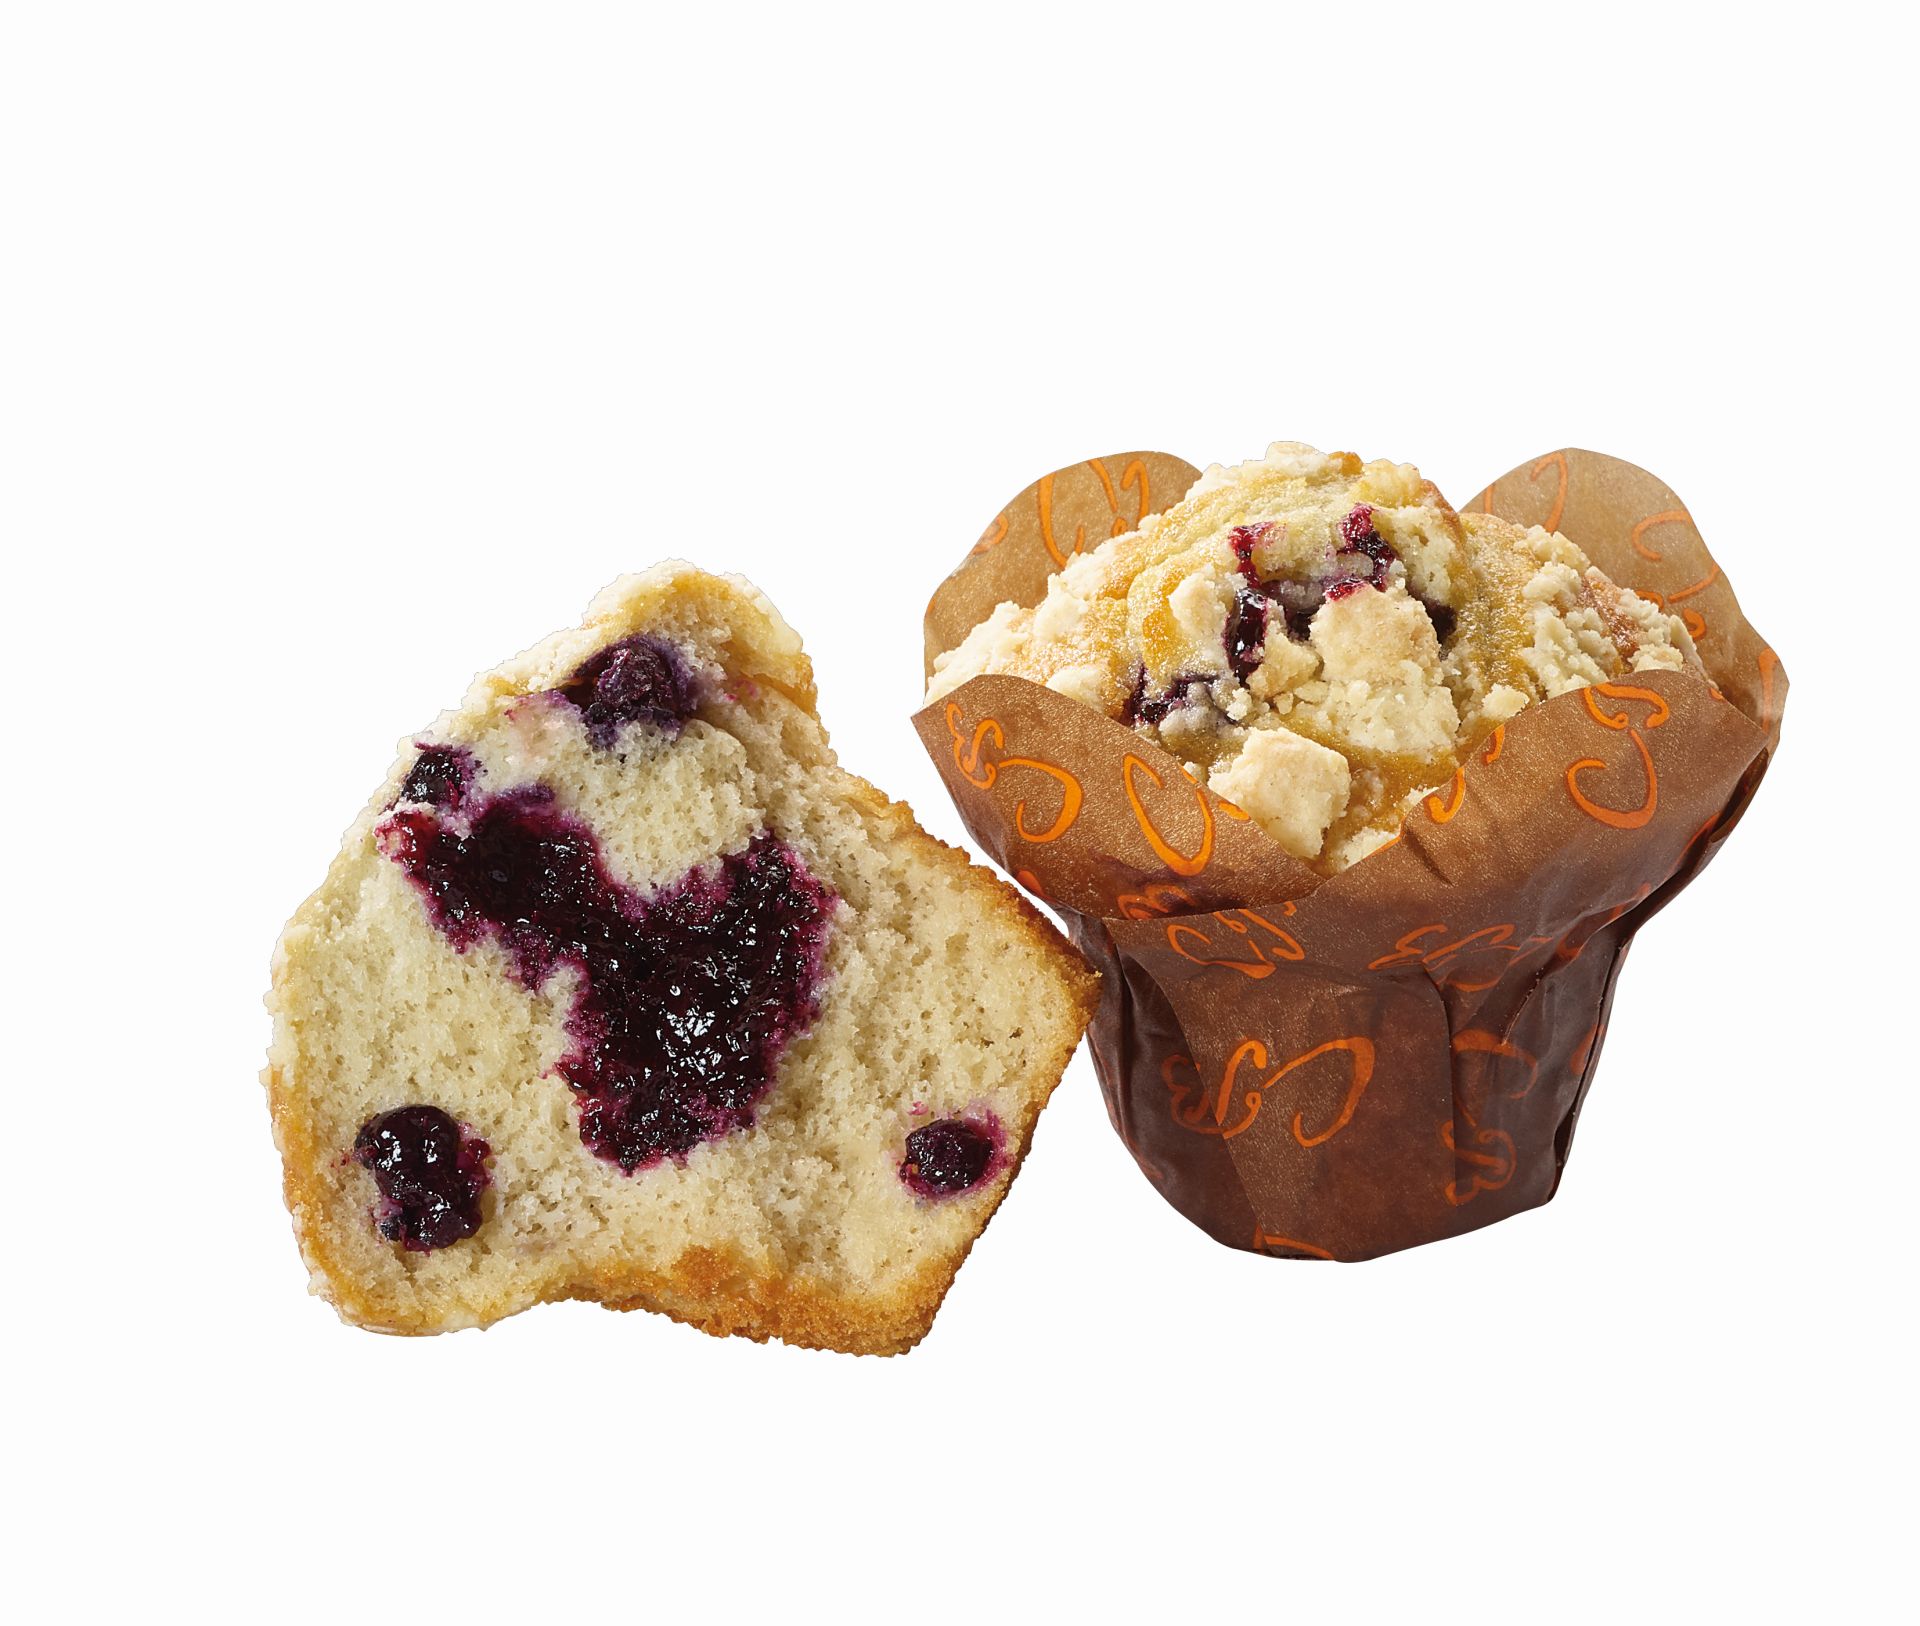 Blueberry filled Crumble XXL Muffin 135g